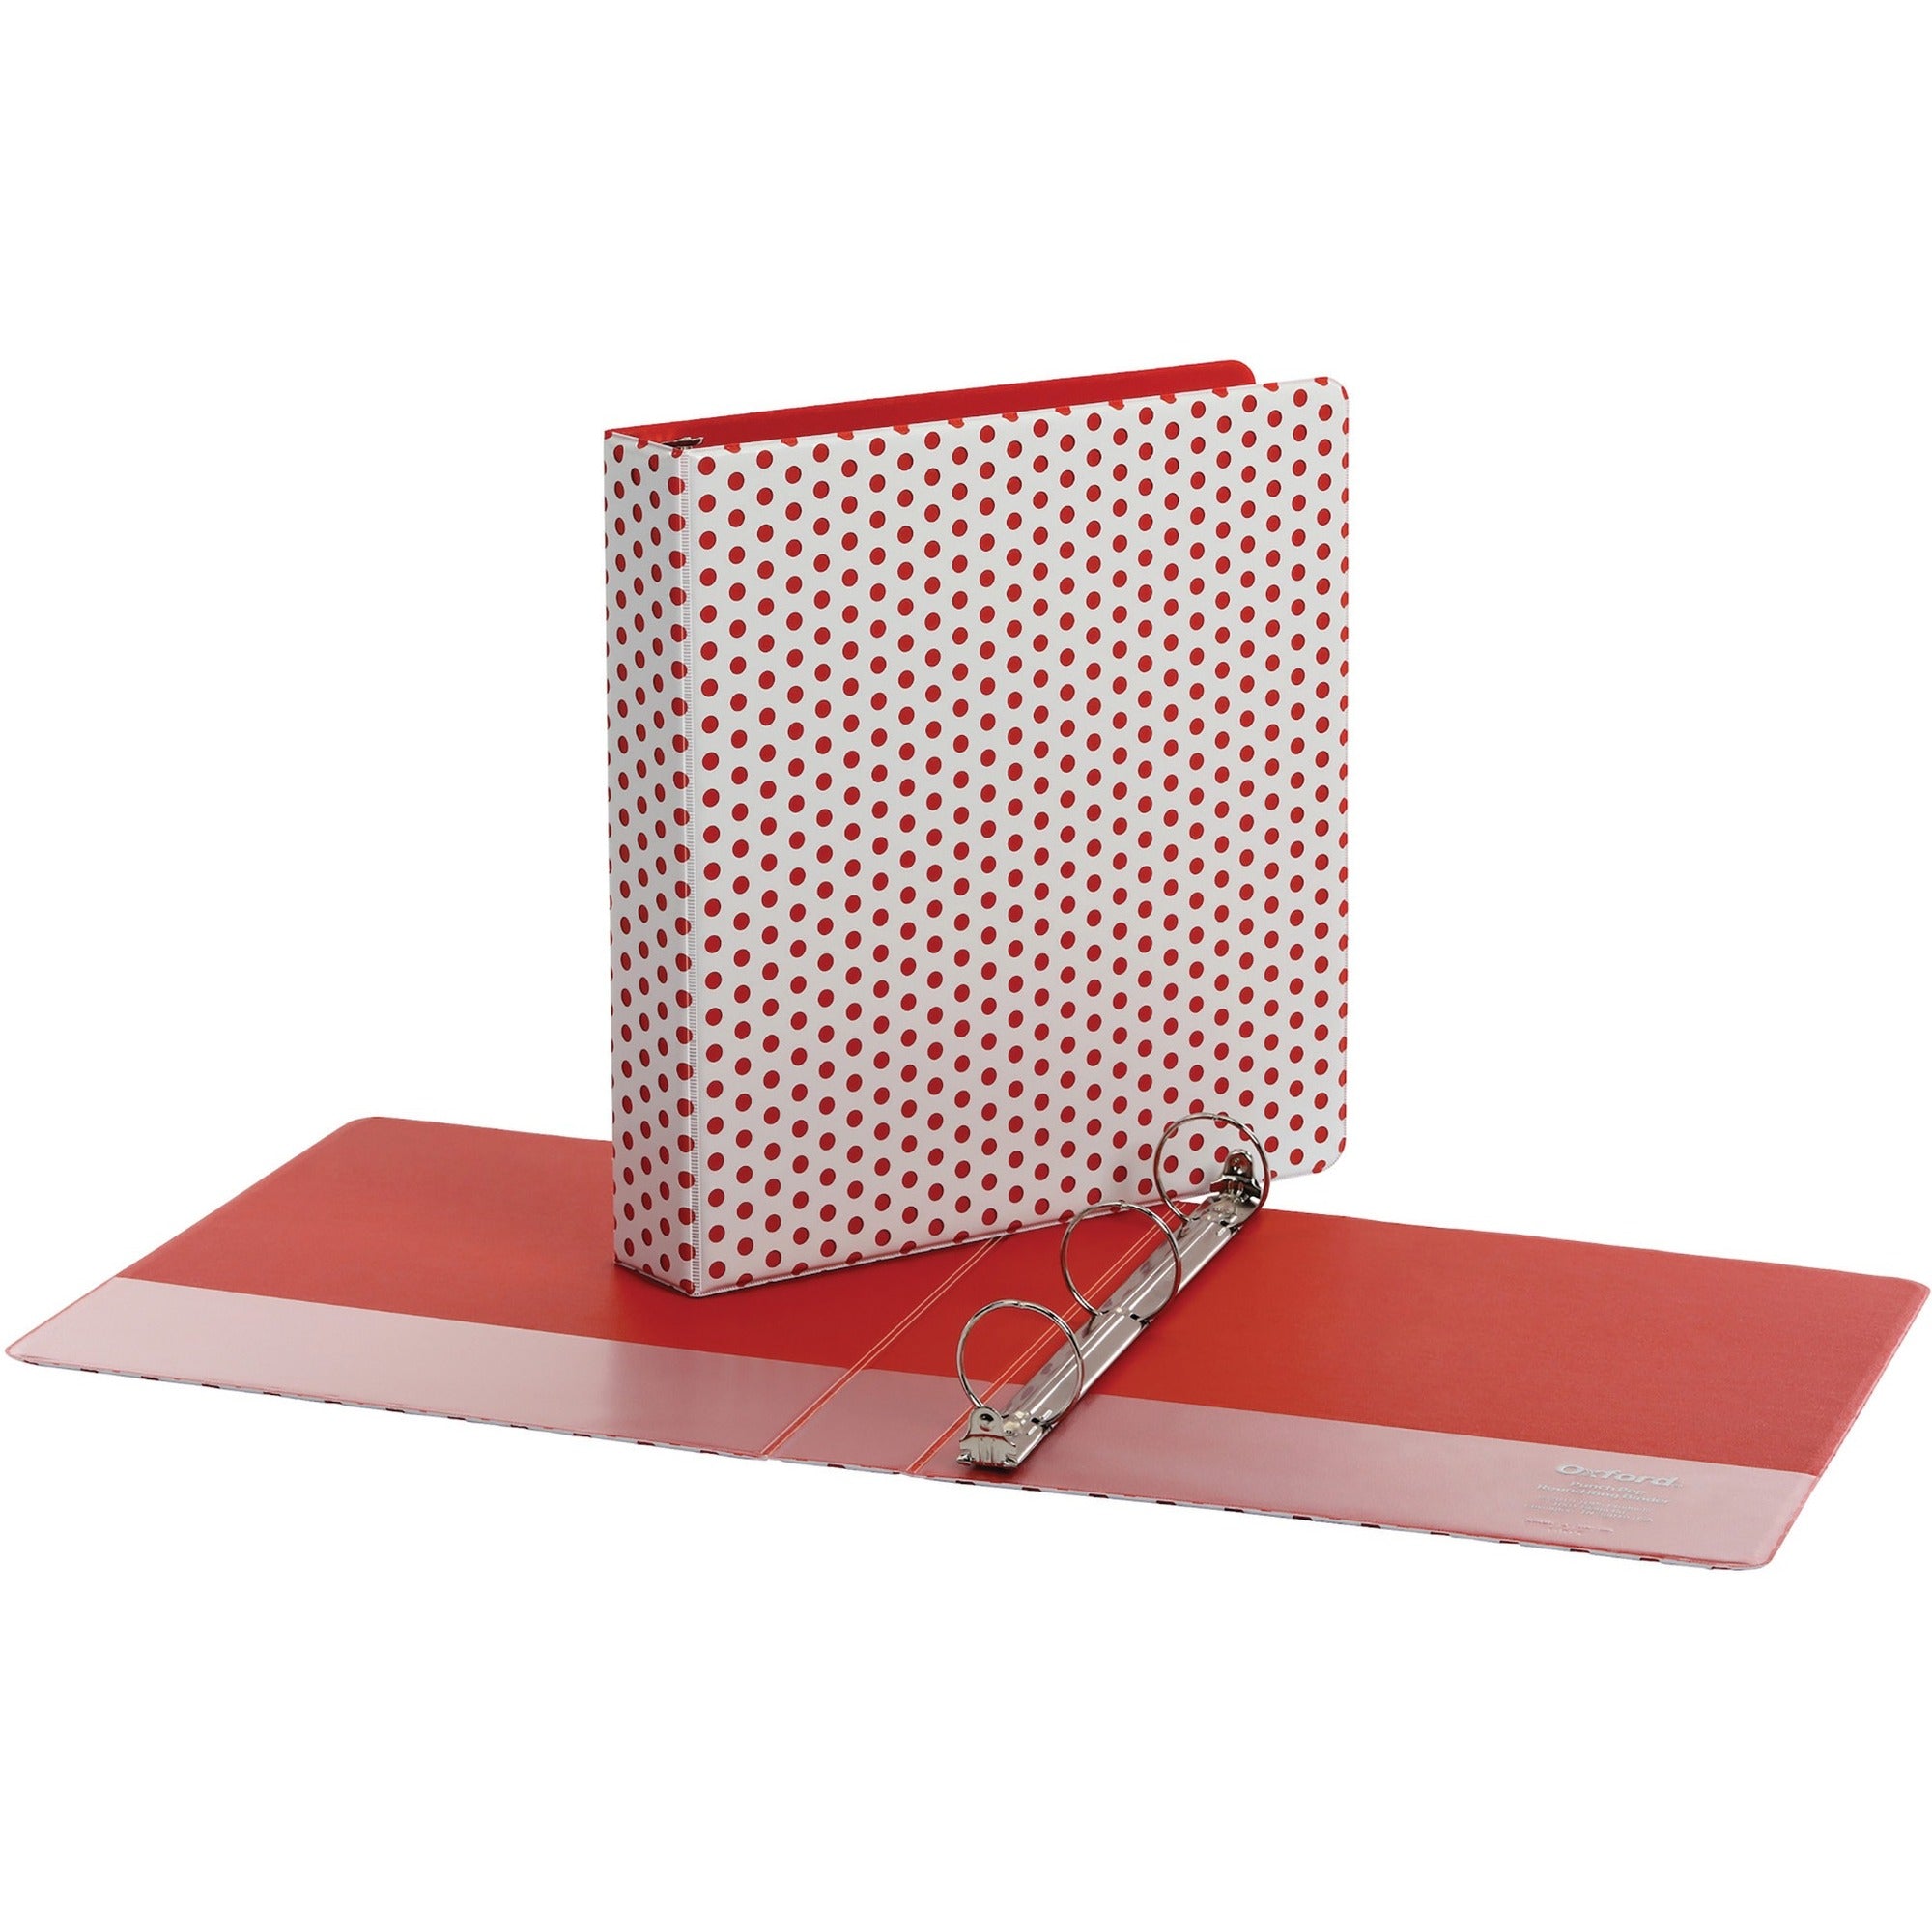 oxford-1-1-2-back-mounted-round-ring-binder-1-1-2-binder-capacity-350-sheet-capacity-round-ring-fasteners-2-internal-pockets-red-1-each_oxf42650 - 1